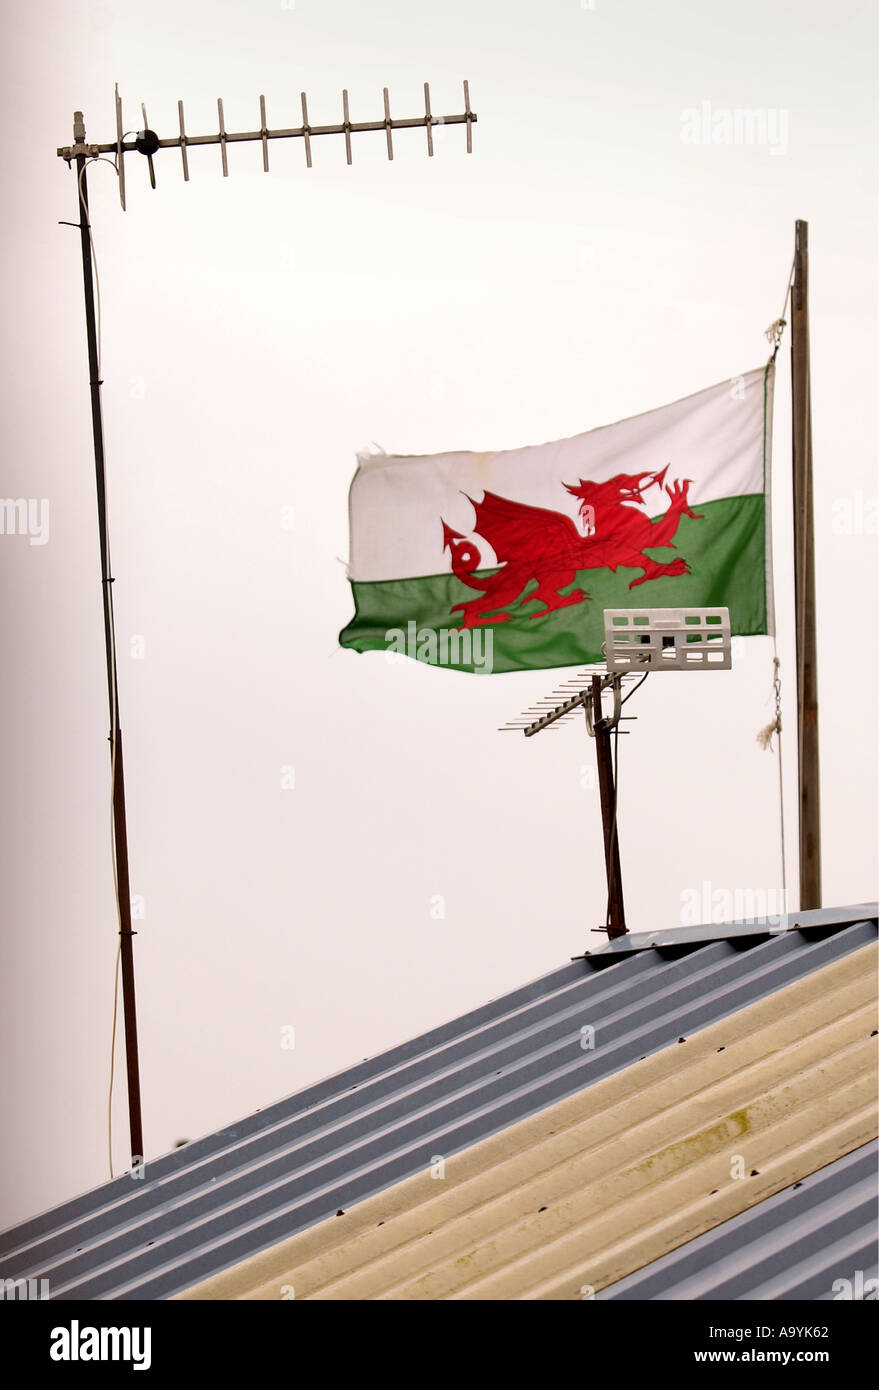 A WELSH FLAG FLIES ABOVE A GARAGE IN WALES 2005 Stock Photo